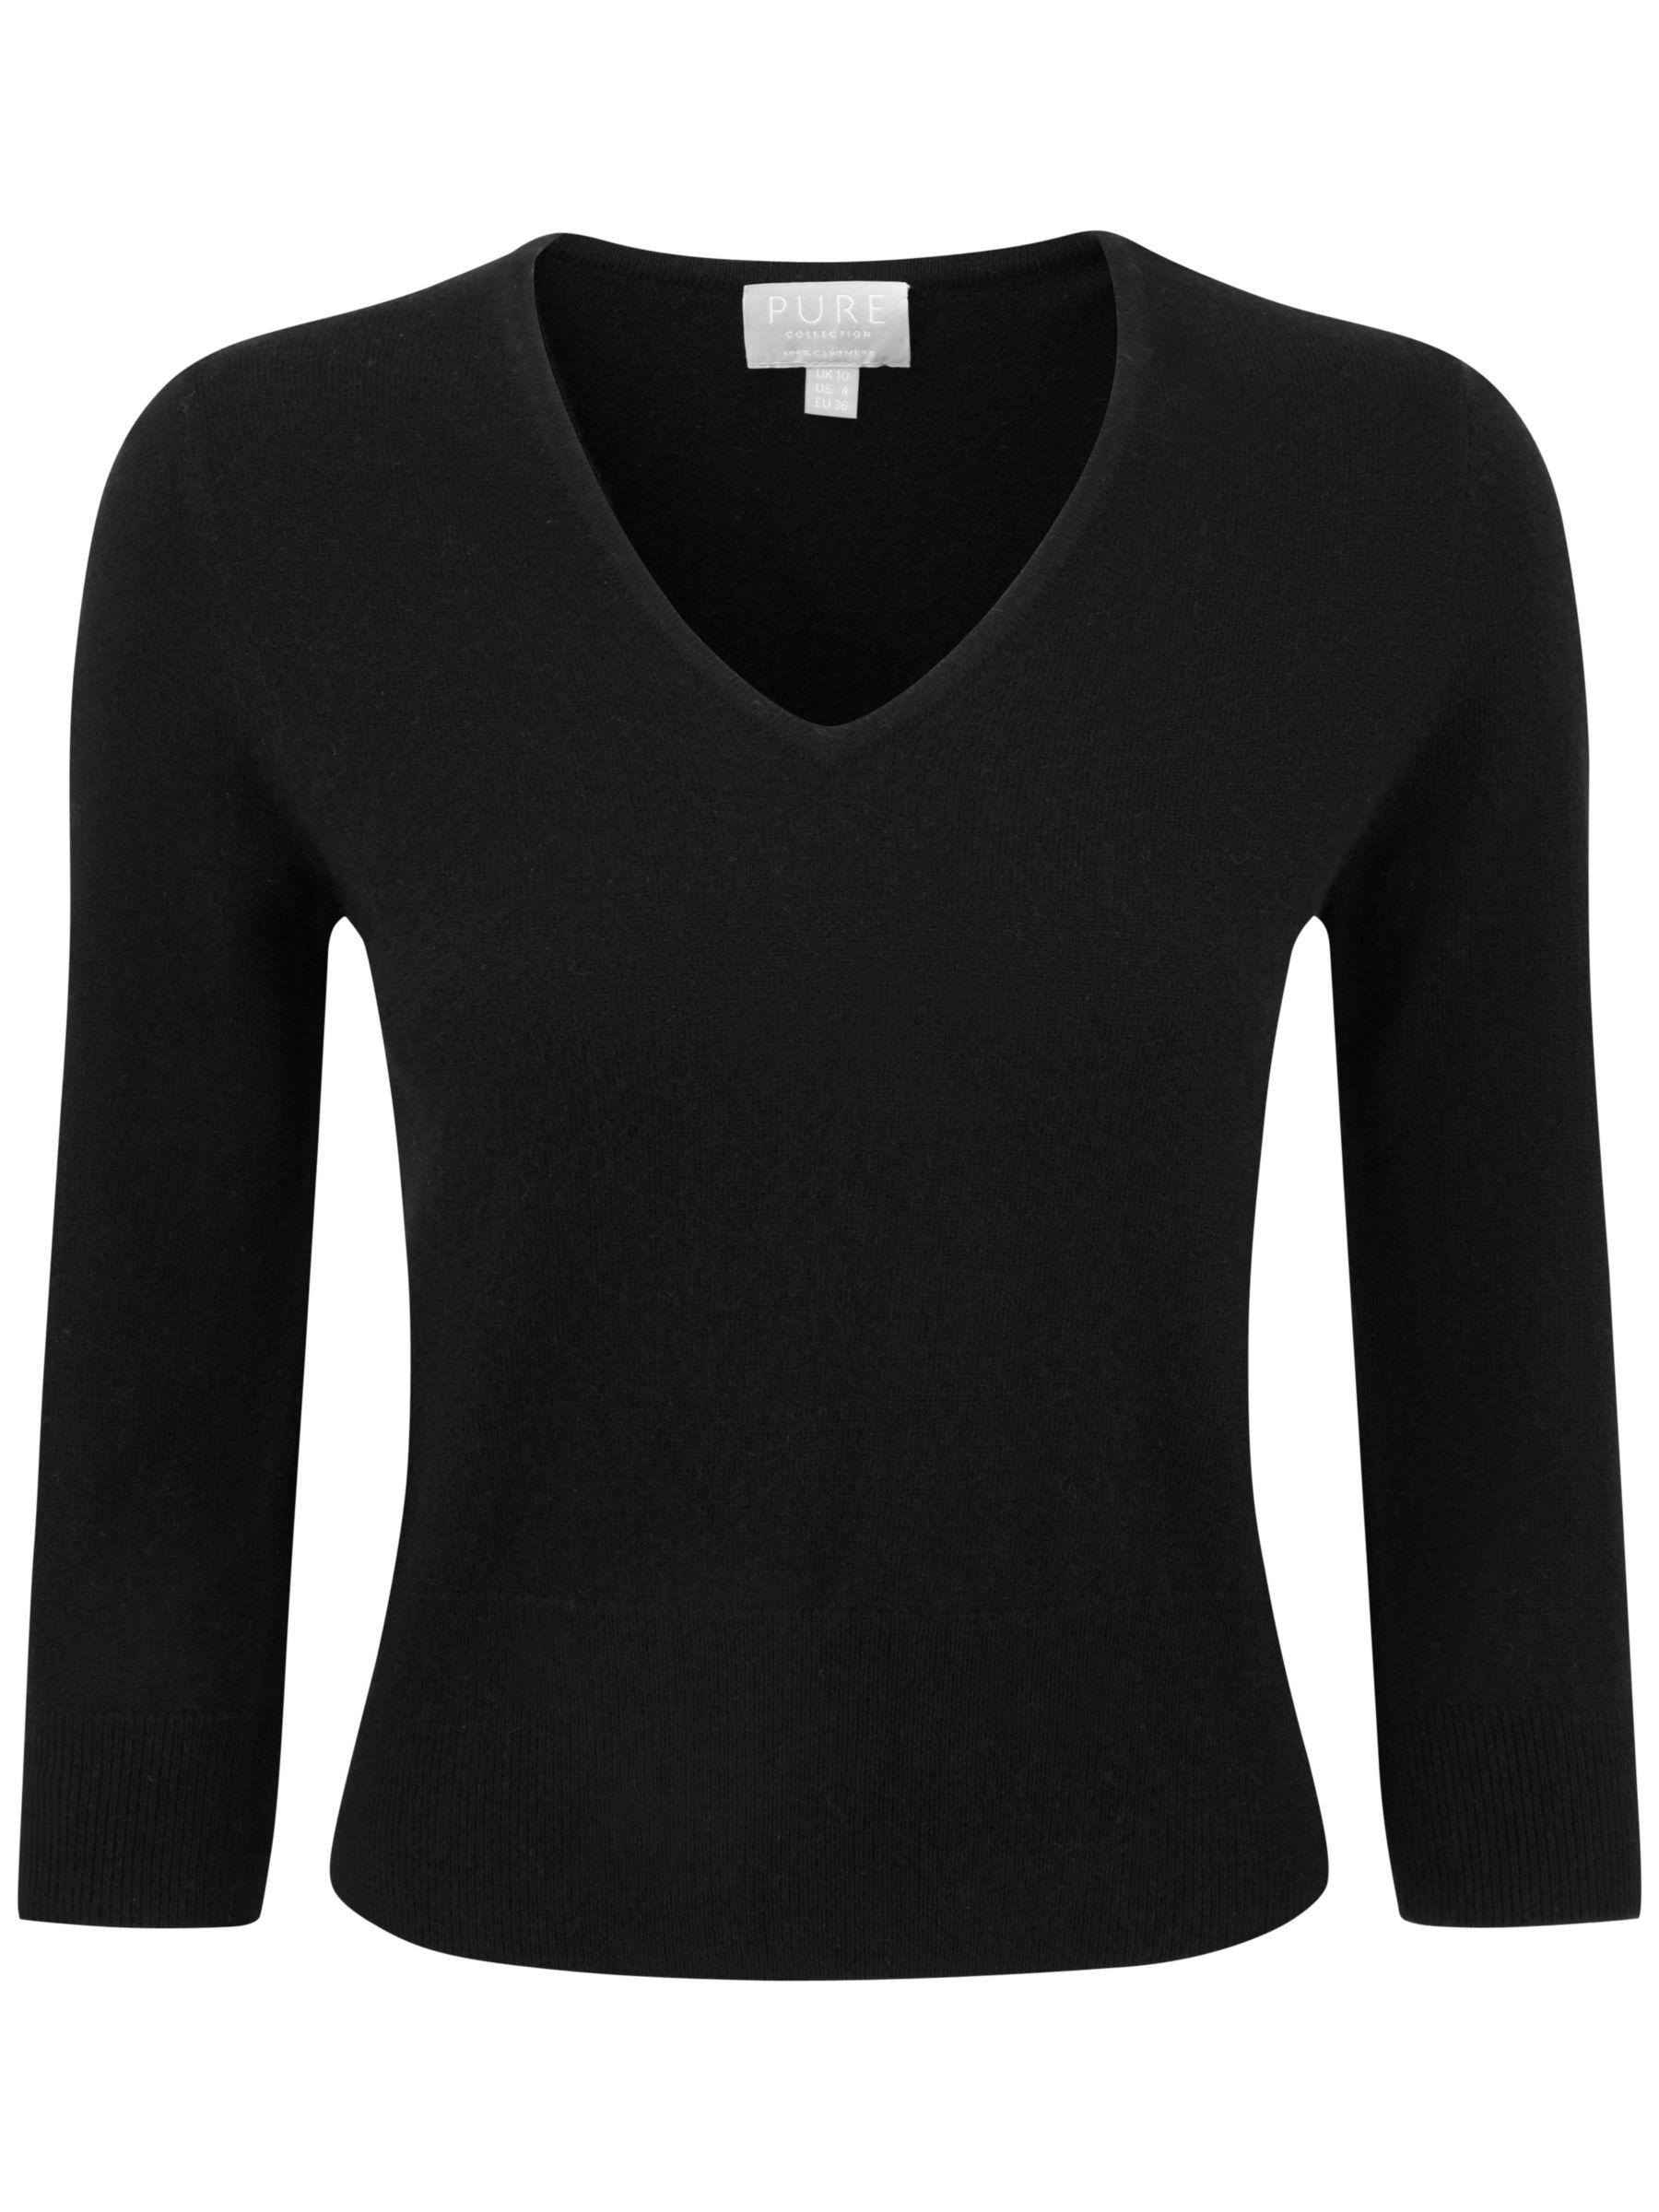 Pure Collection Cropped Cashmere Jumper, Black, 14